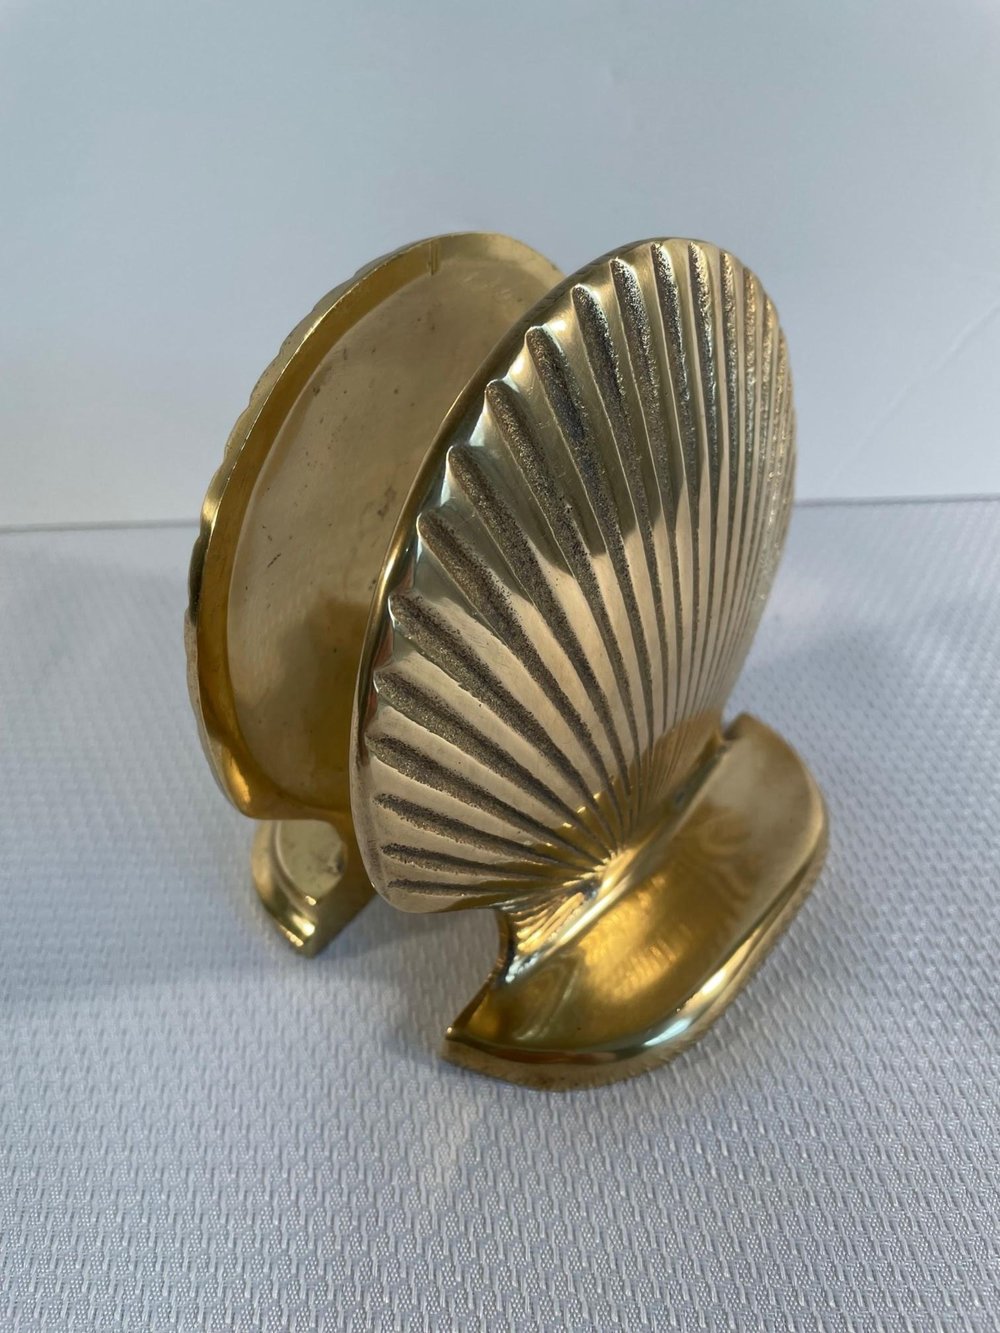 Mid Century Modern Brass Seashell Scalloped Bookends - a Pair